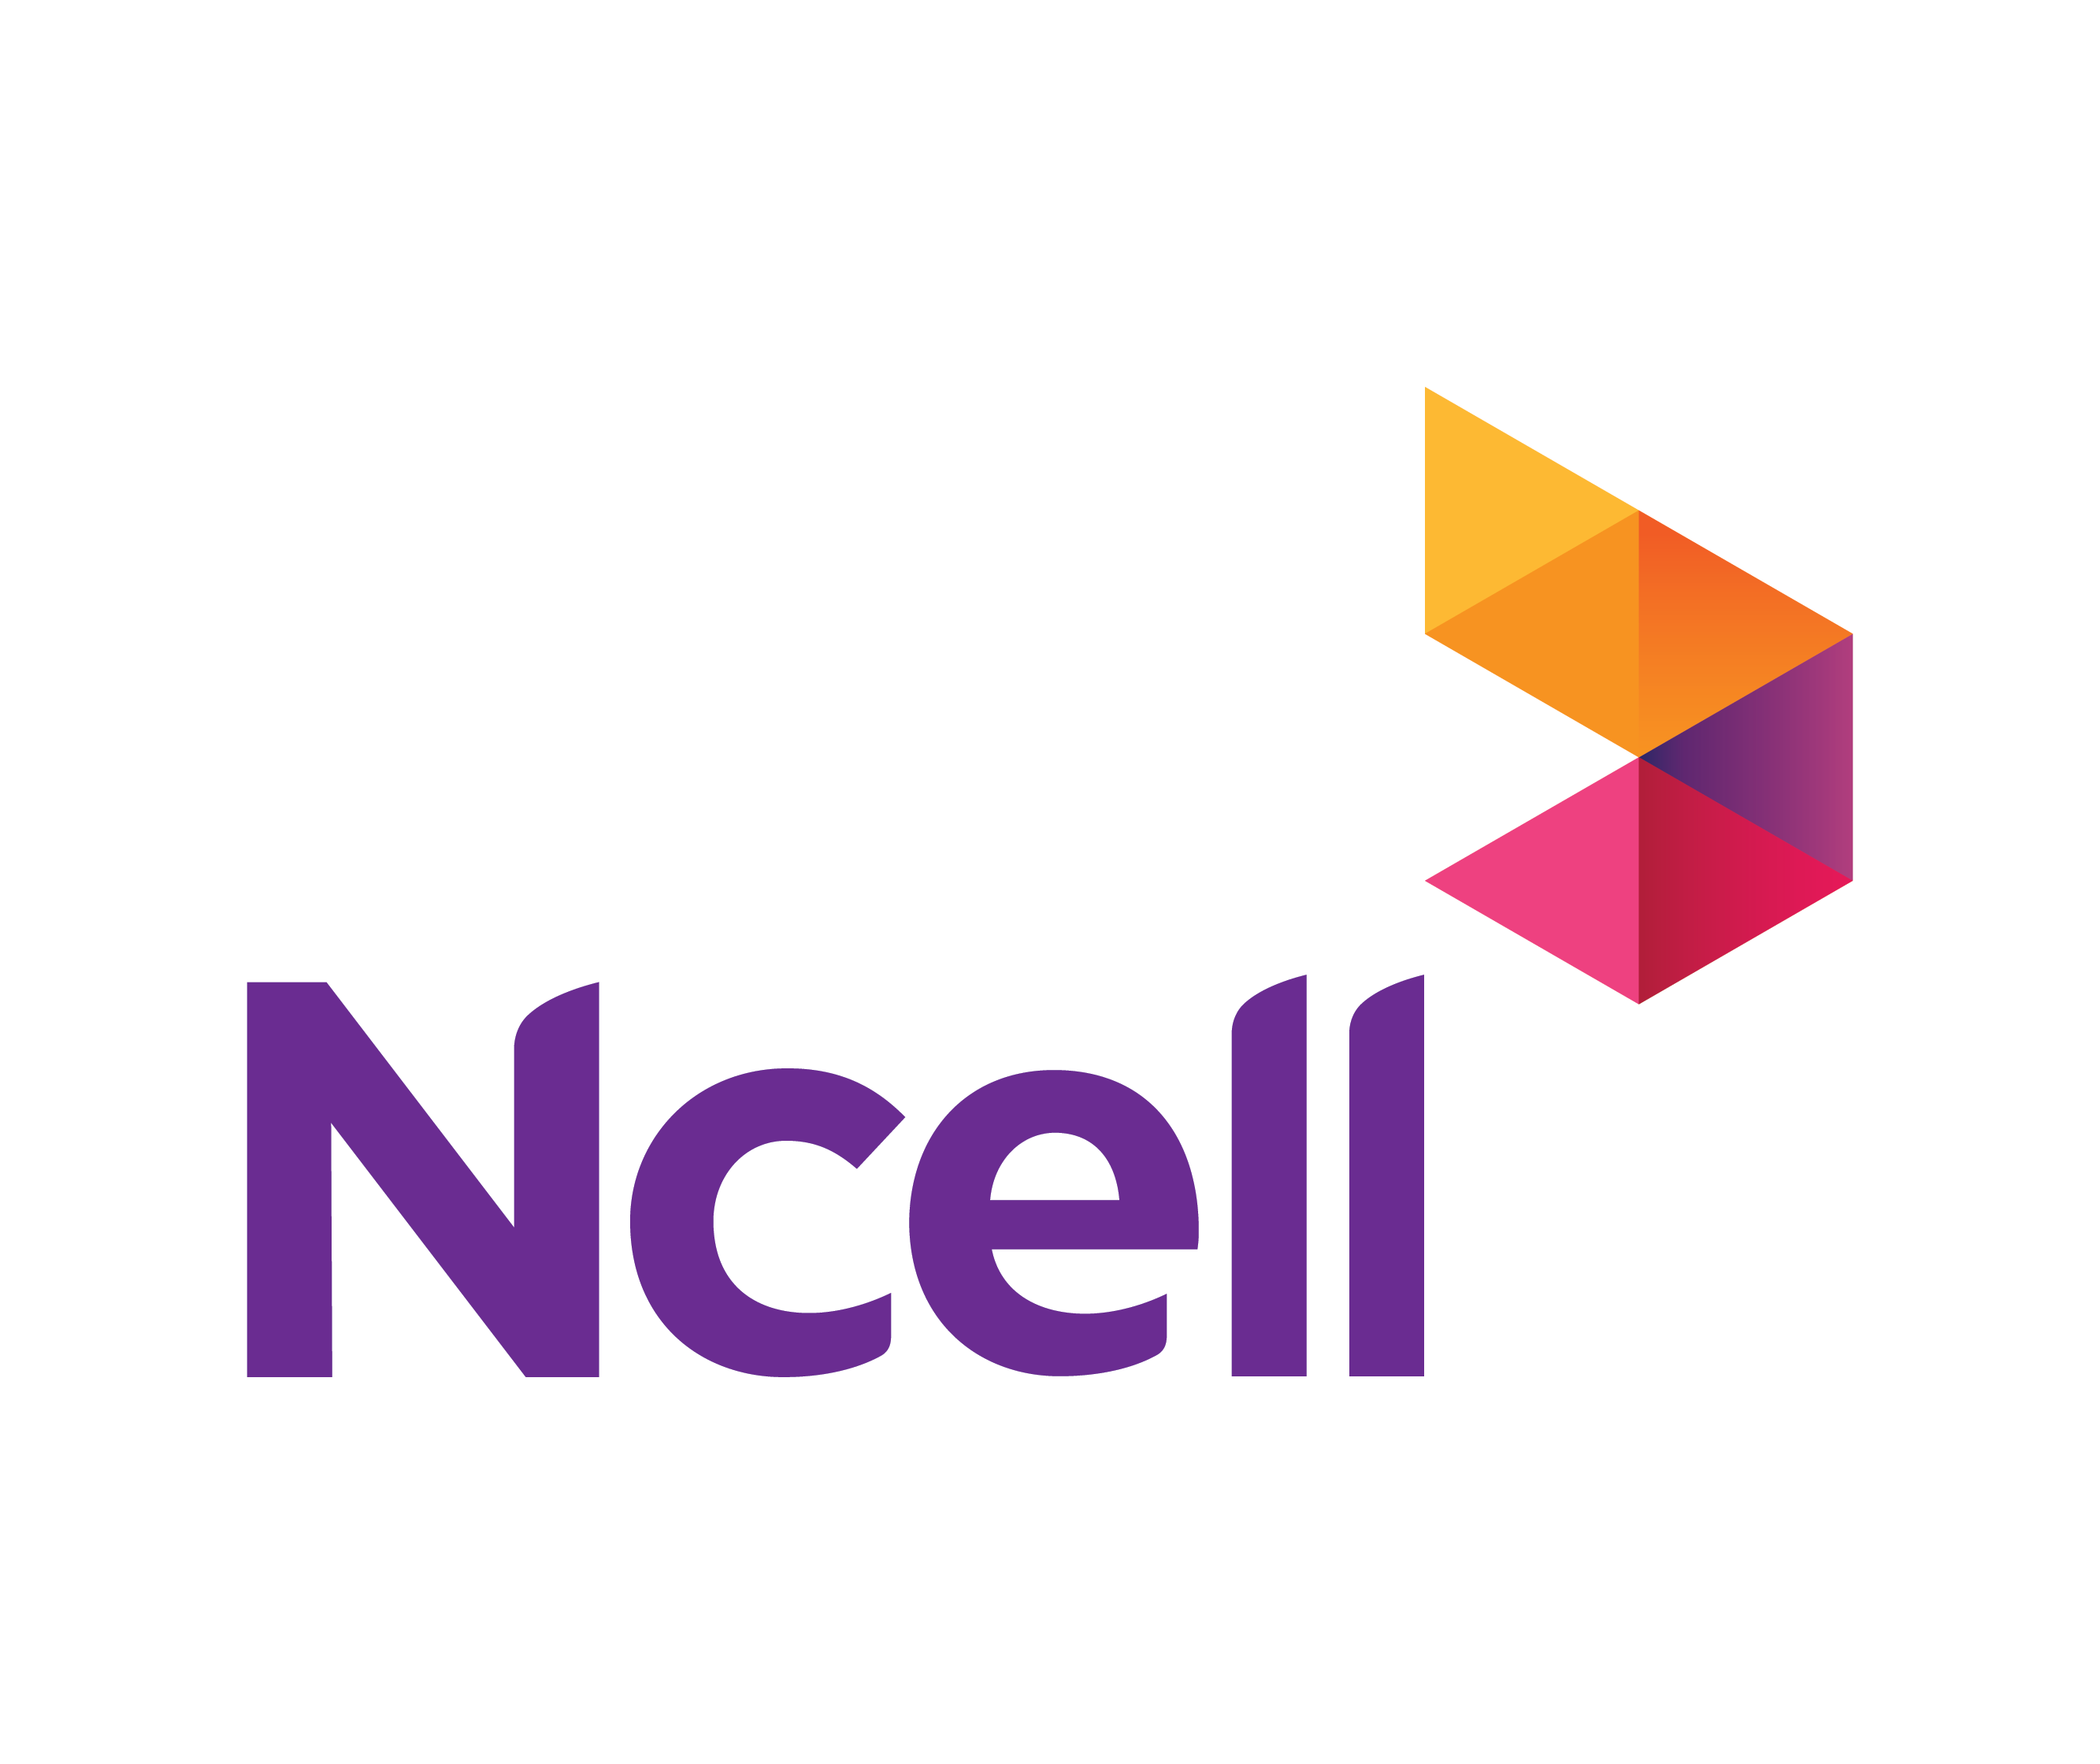 Axiata’s Ncell departure raises questions: Inland Revenue Department examines tax compliance